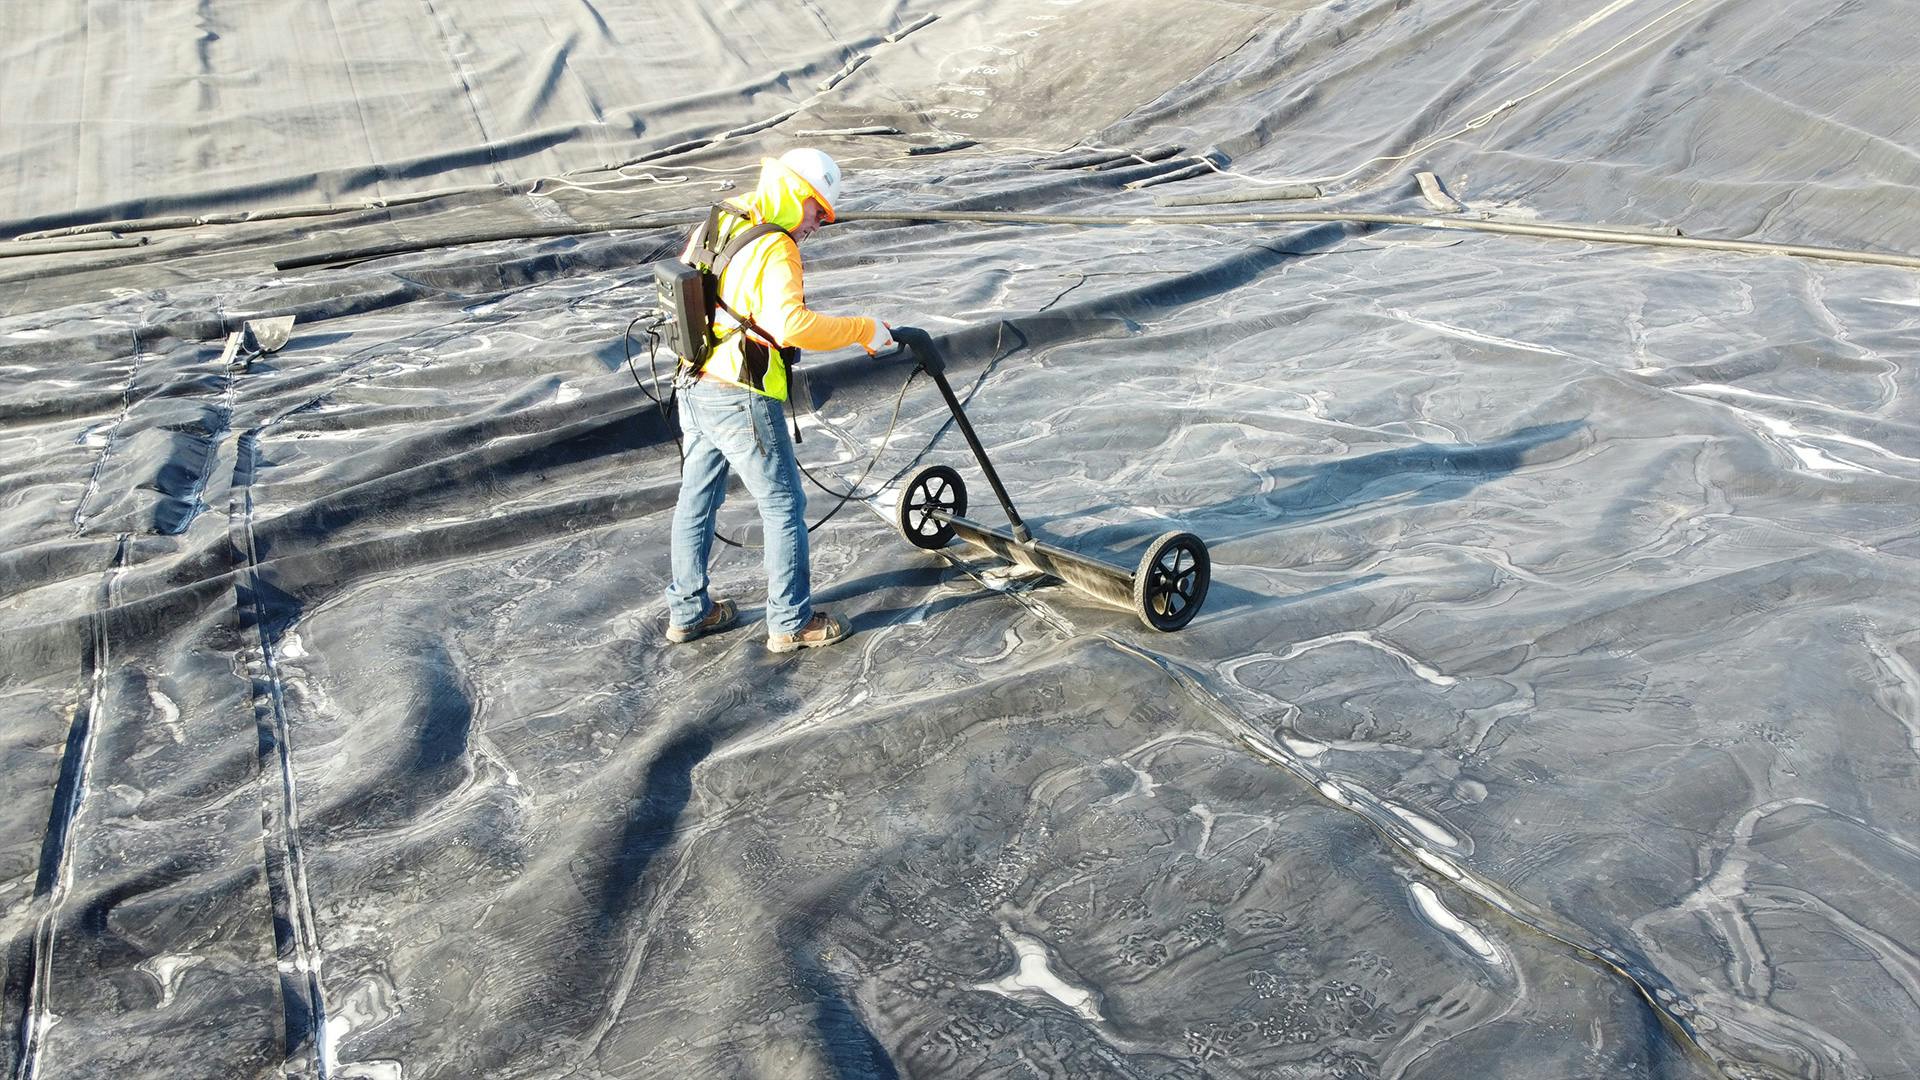 The S-100 spark tester conforms to wrinkles to make intimate contact between the geomembrane and conductive substrate, providing more accurate leak detection than traditional ELL surveys.